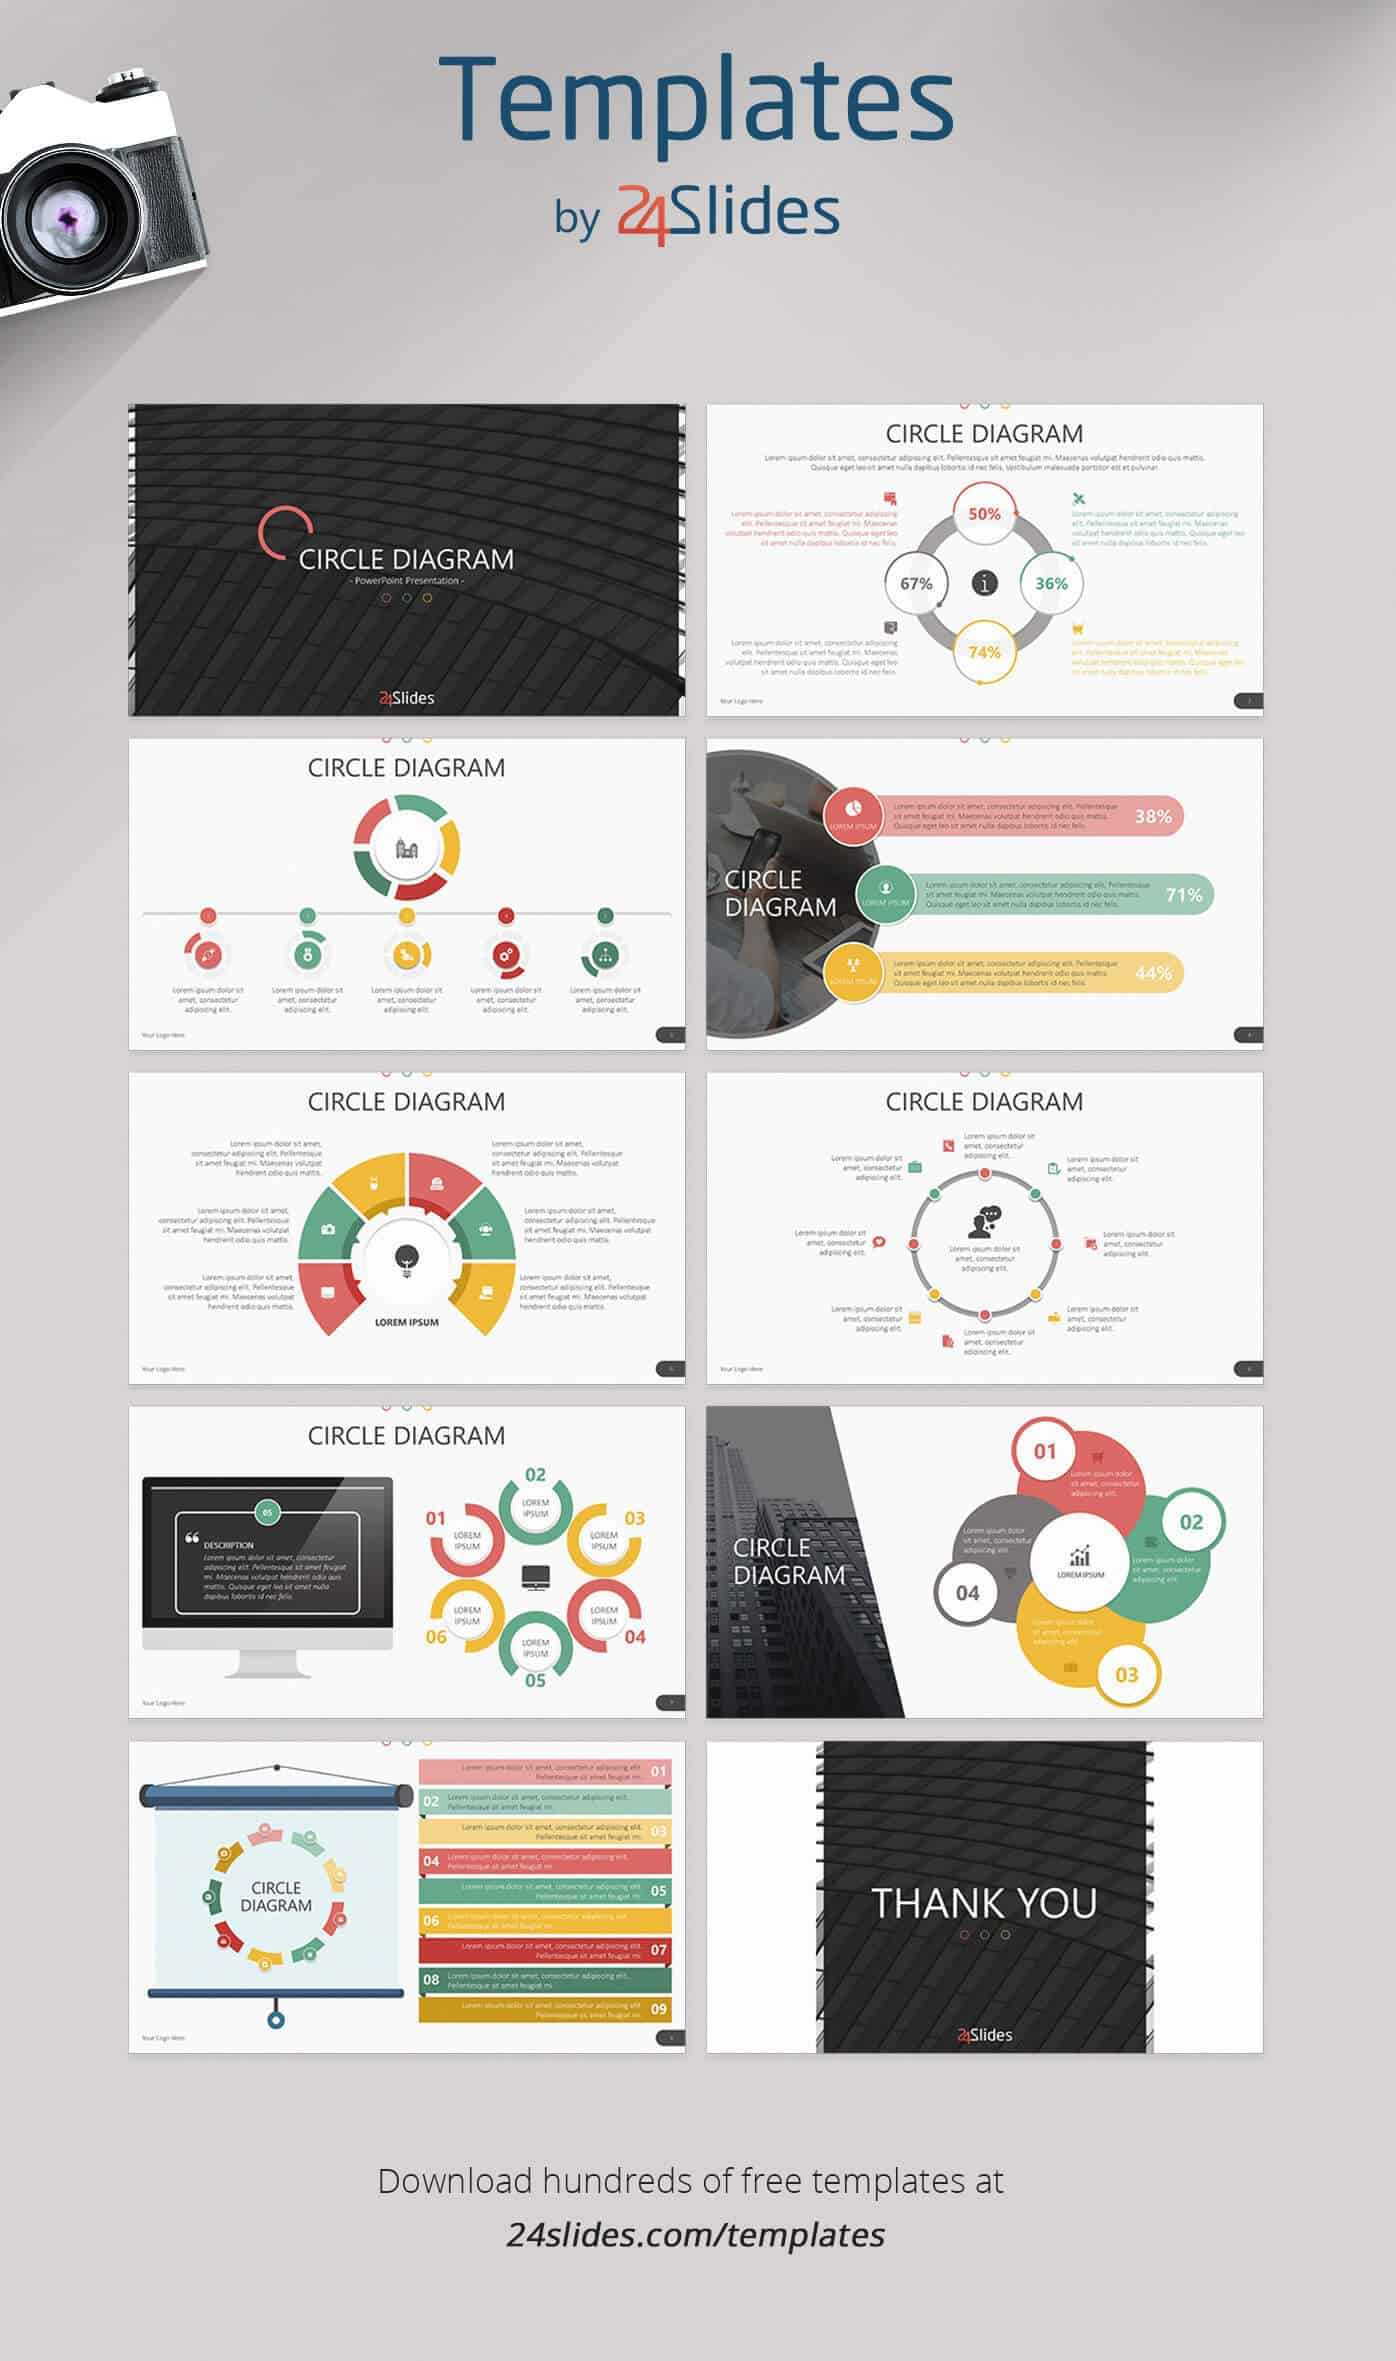 15 Fun And Colorful Free Powerpoint Templates | Present Better With Regard To Powerpoint Slides Design Templates For Free